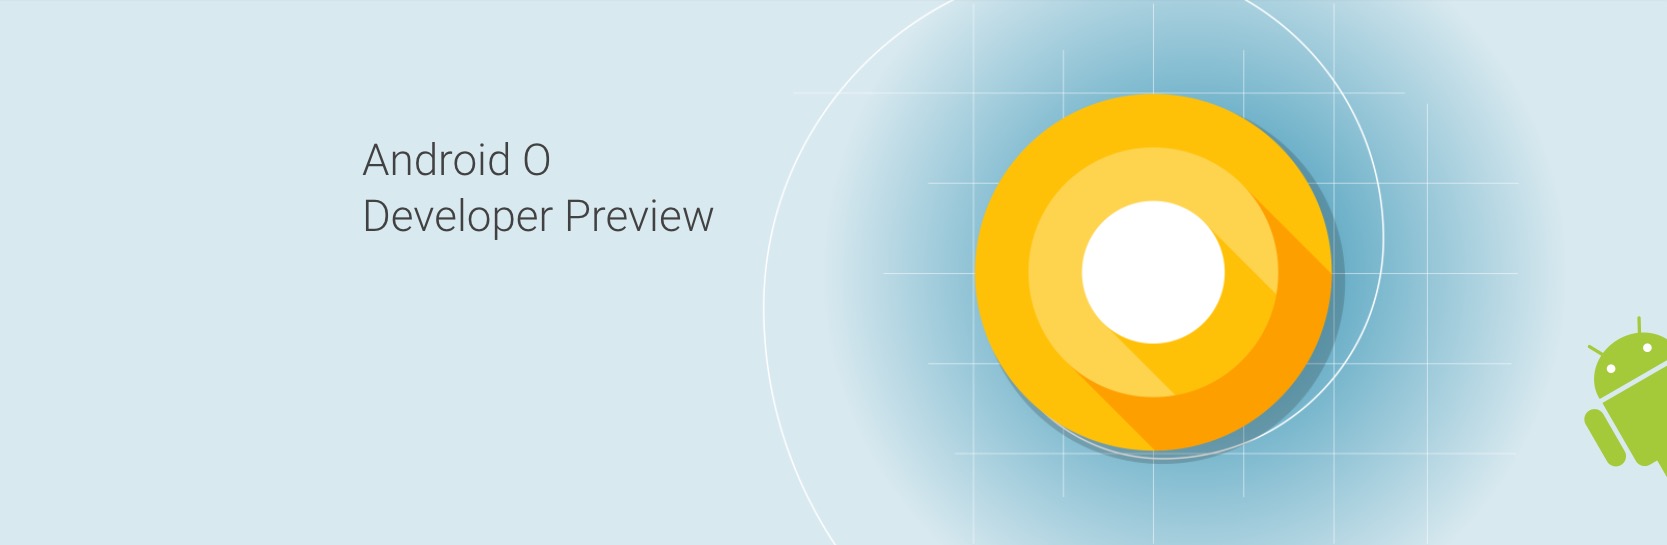 Android O Developer Preview hero